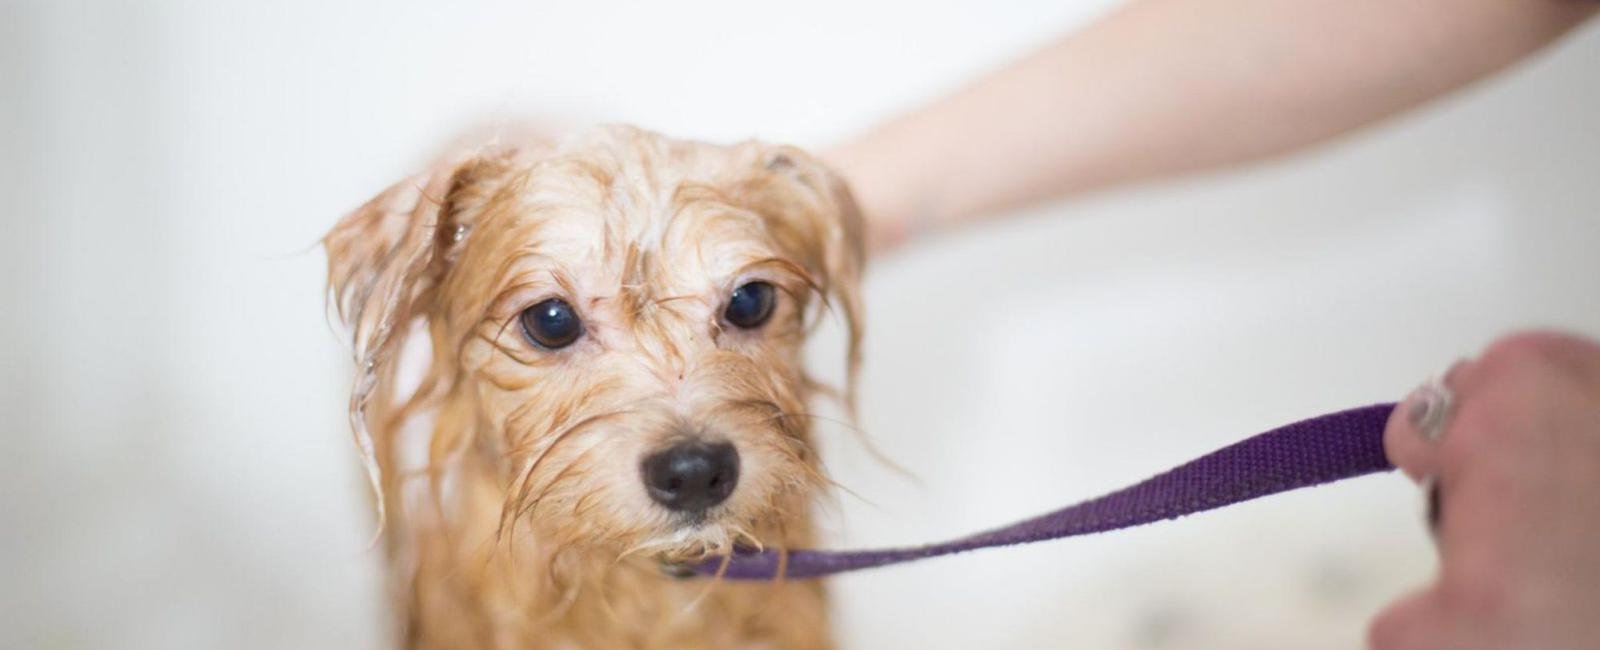 When Can You Bathe Your Dog After She Gave Birth?